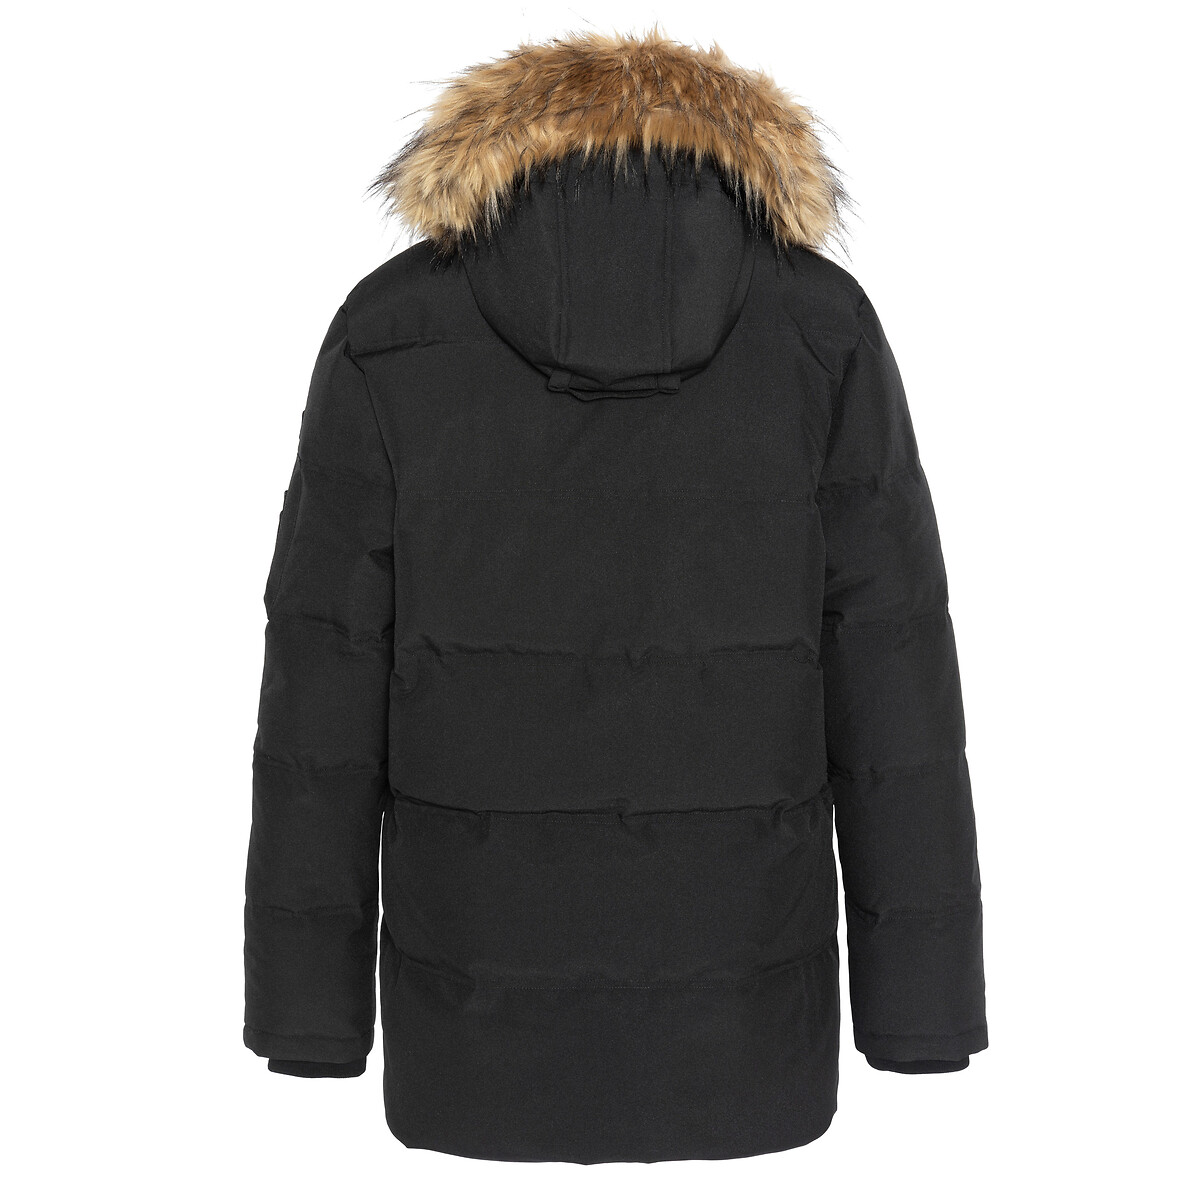 Hooded Winter Padded Jacket with Faux Fur Trim, Mid-Length